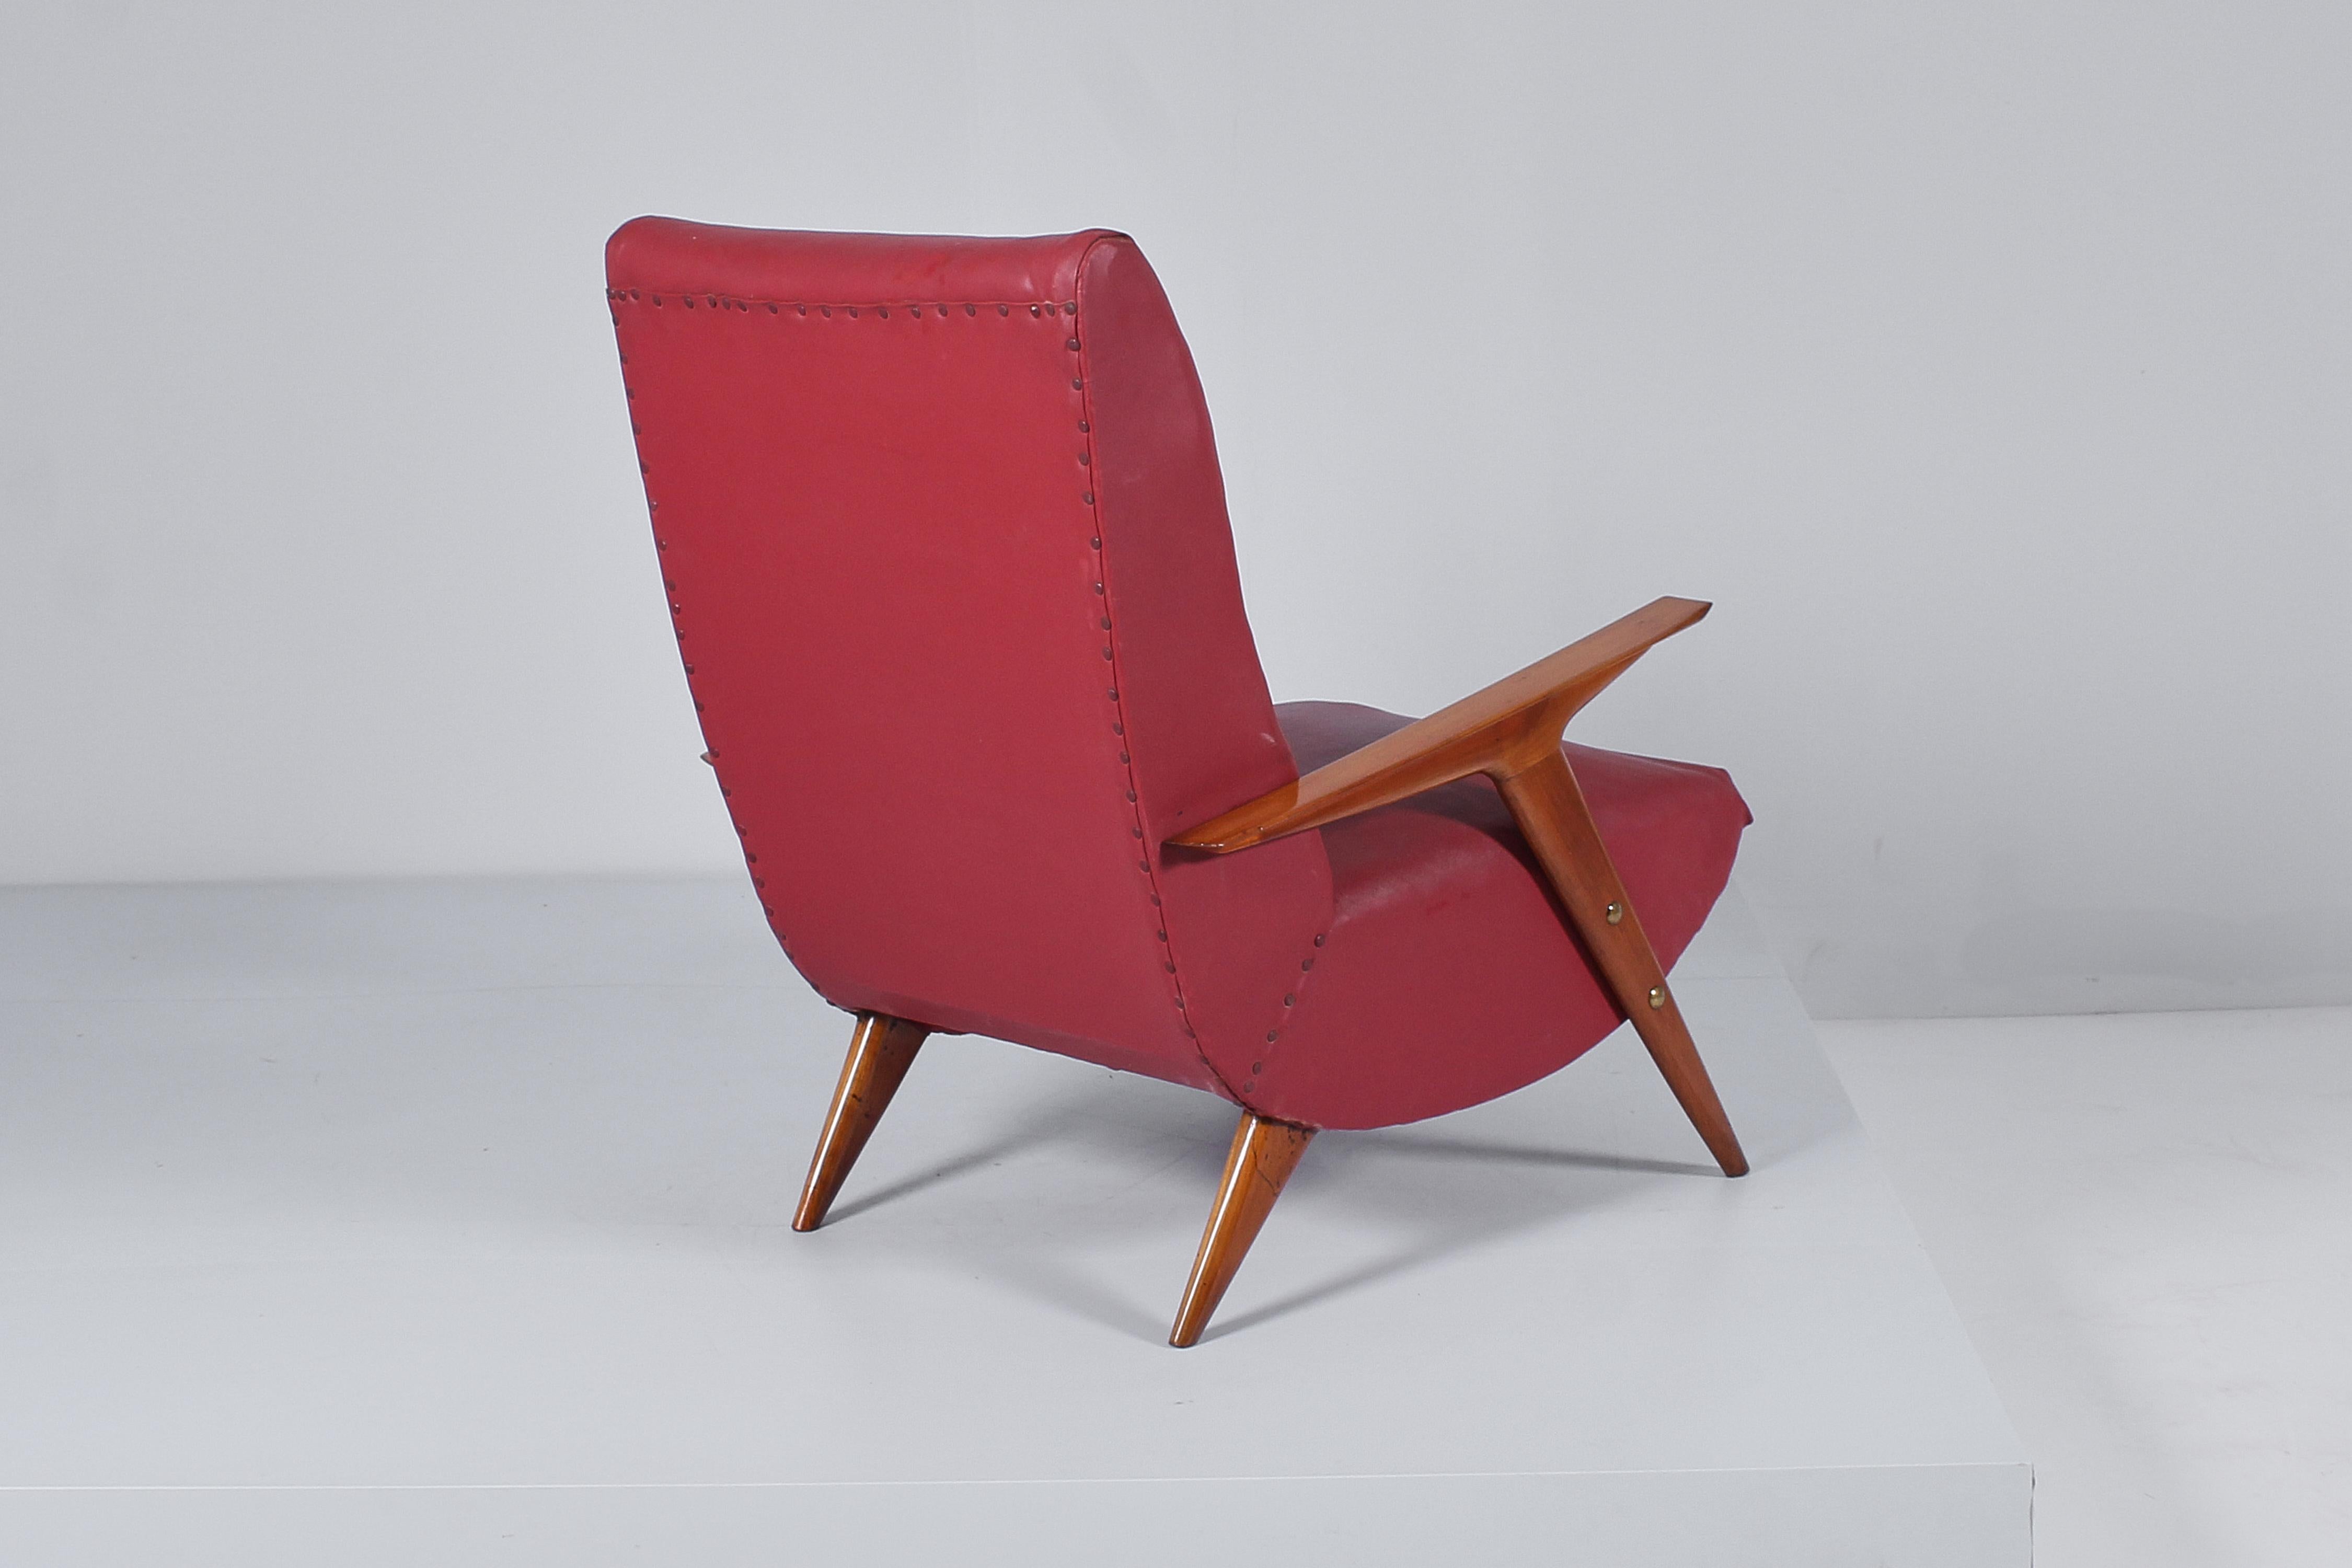 Italian Mid-Century C. Graffi (attr.) Shaped Wood and Red Leather Armchair 50s Italy  For Sale